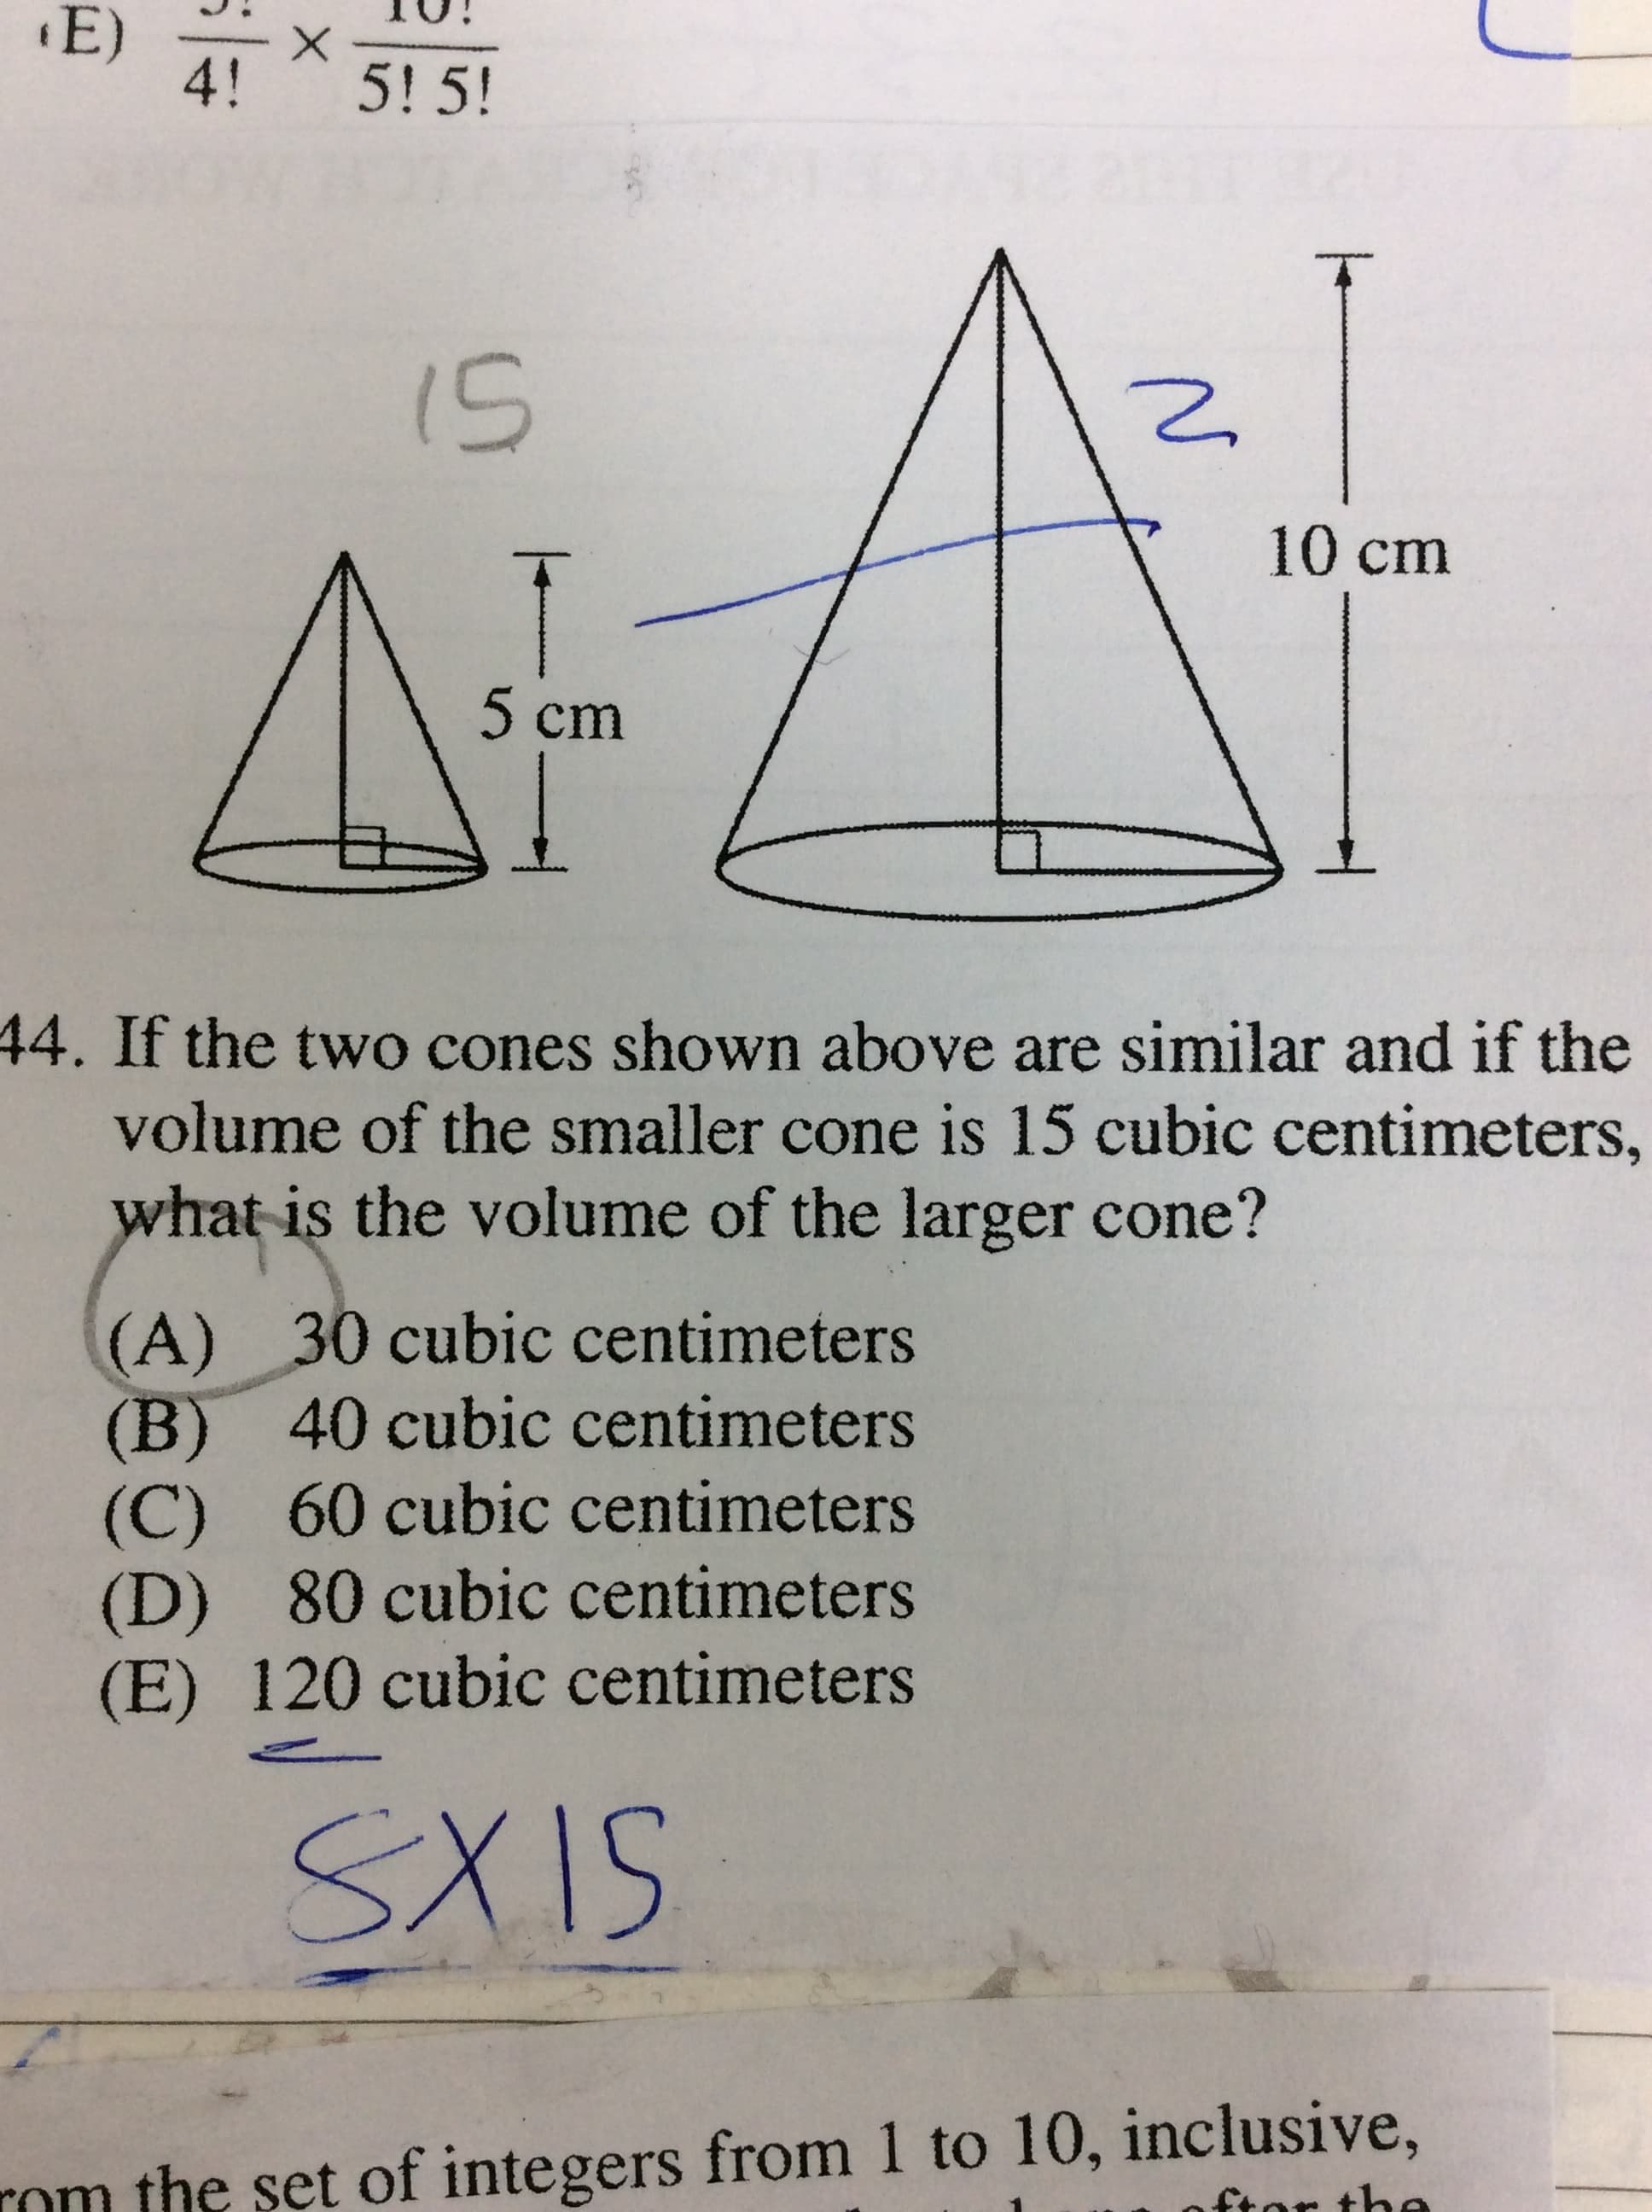 E)
4!
5! 5!
i5
10 cm
5 cm
44. If the two cones shown above are similar and if the
volume of the smaller cone is 15 cubic centimeters,
what is the volume of the larger cone?
(A) 30 cubic centimeters
(B) 40 cubic centimeters
(C) 60 cubic centimeters
(D) 80 cubic centimeters
(E) 120 cubic centimeters
SXIS
rom the set of integers from 1 to 10, inclusive,
ftor the
